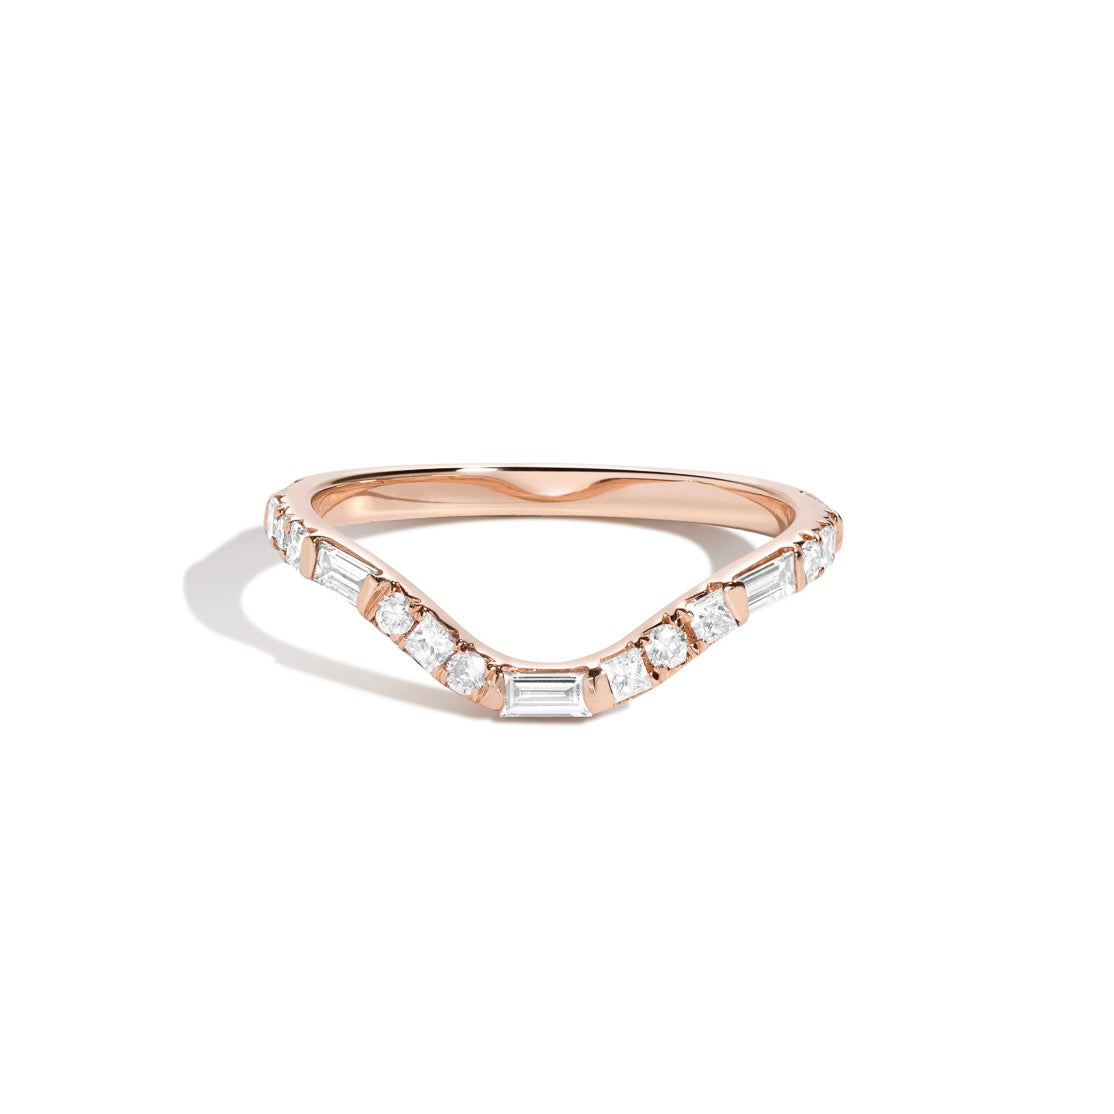 Shahla Karimi Jewelry Perfect curved Demi Band 14K Rose Gold